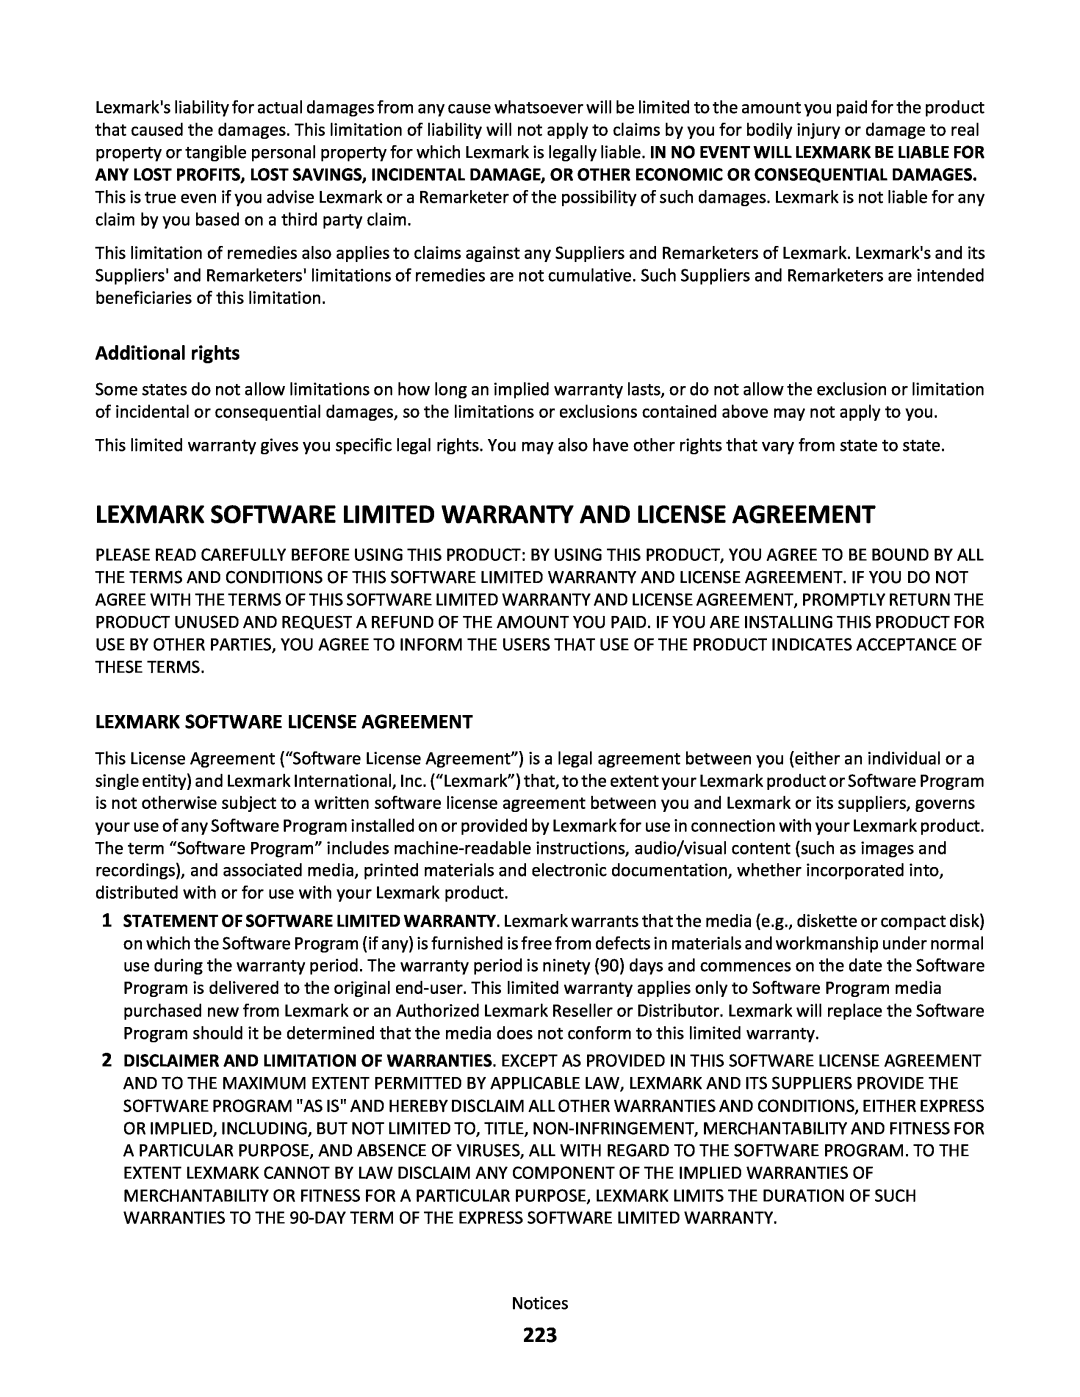 Lexmark C790 manual Lexmark Software Limited Warranty And License Agreement, Additional rights 